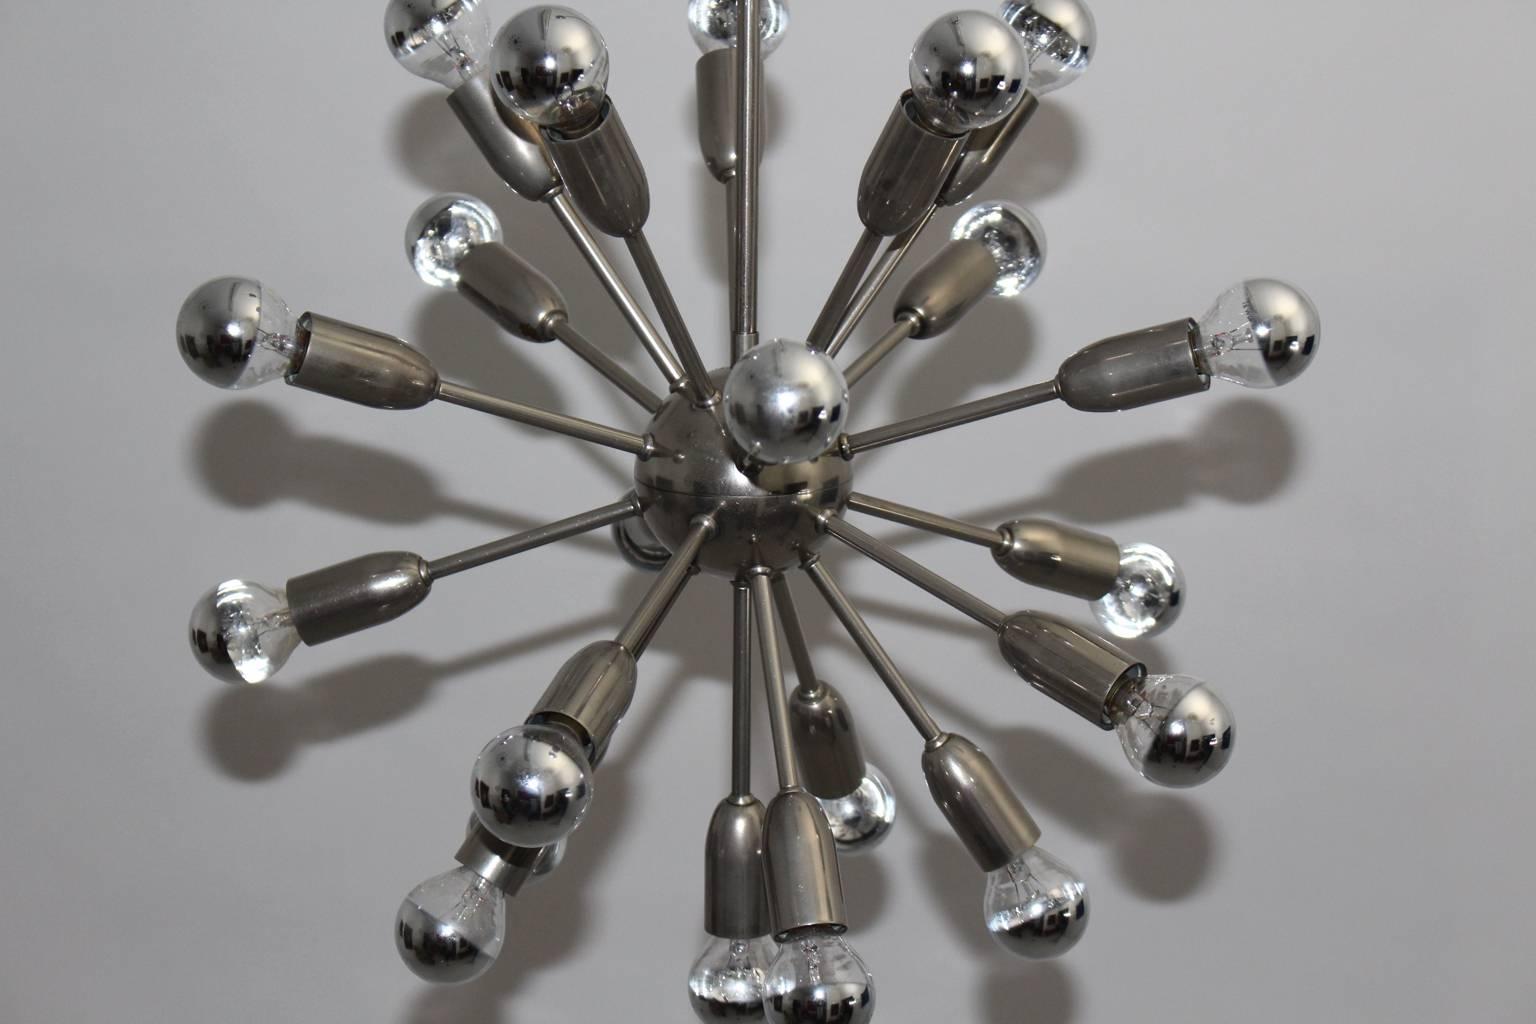 Mid Century Modern nickel-plated metal Sputnik chandelier with 21 arms, which was designed 1960s Italy.
Metal sockets with round chromed bulbs E 14.

Measurements:
Diameter 19.68 in (50cm),
height 30.31 in (77cm).
All measures are approximate.